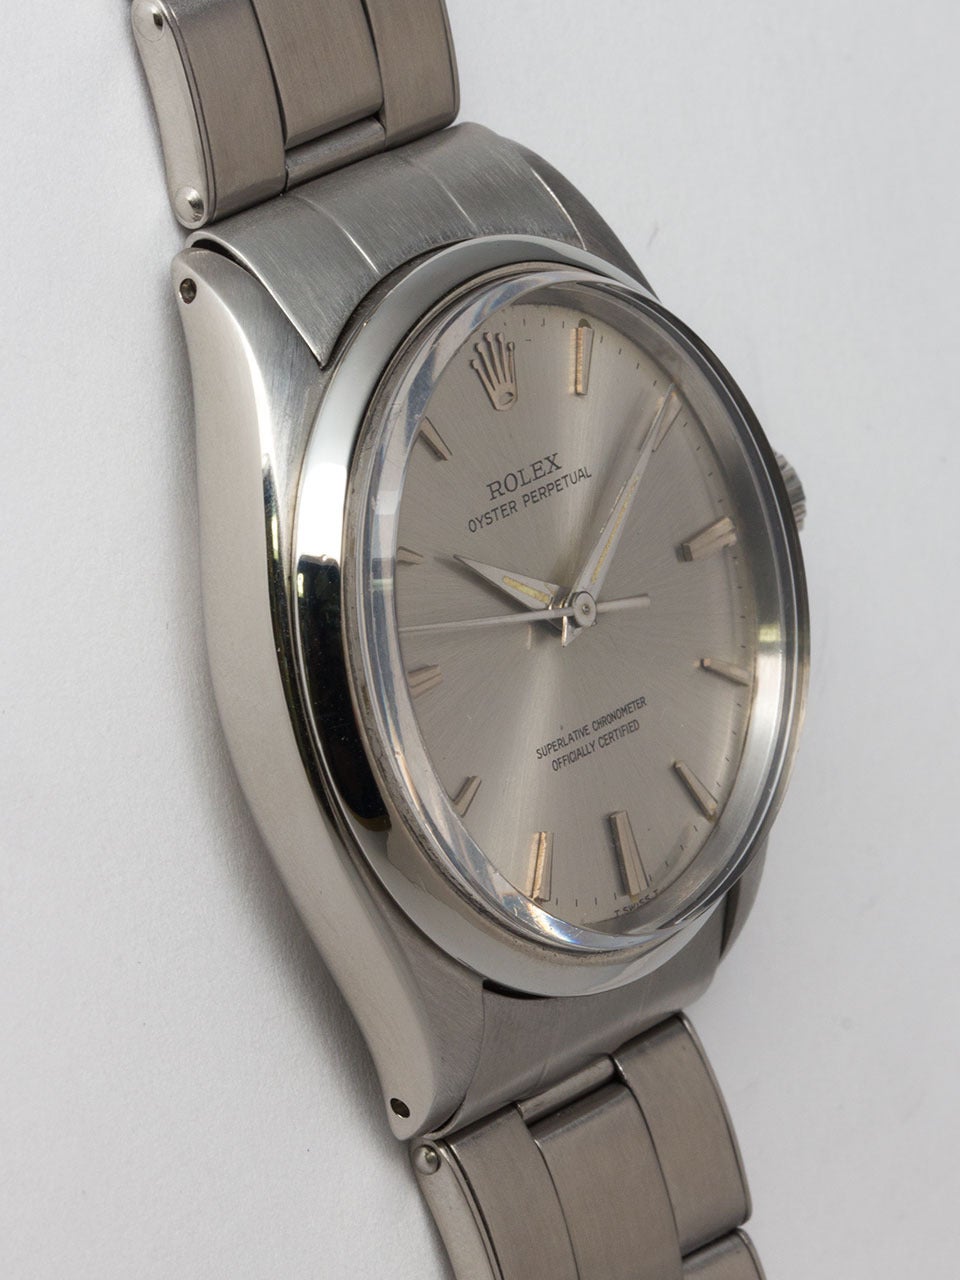 Rolex Stainless Steel Oyster Perpetual Wristwatch ref 1002 serial #1.2 million circa 1965. 34mm diameter case with smooth bezel and acrylic crystal. Very pleasing original silvered satin dial with raised tapered silver indexes and tapered silver